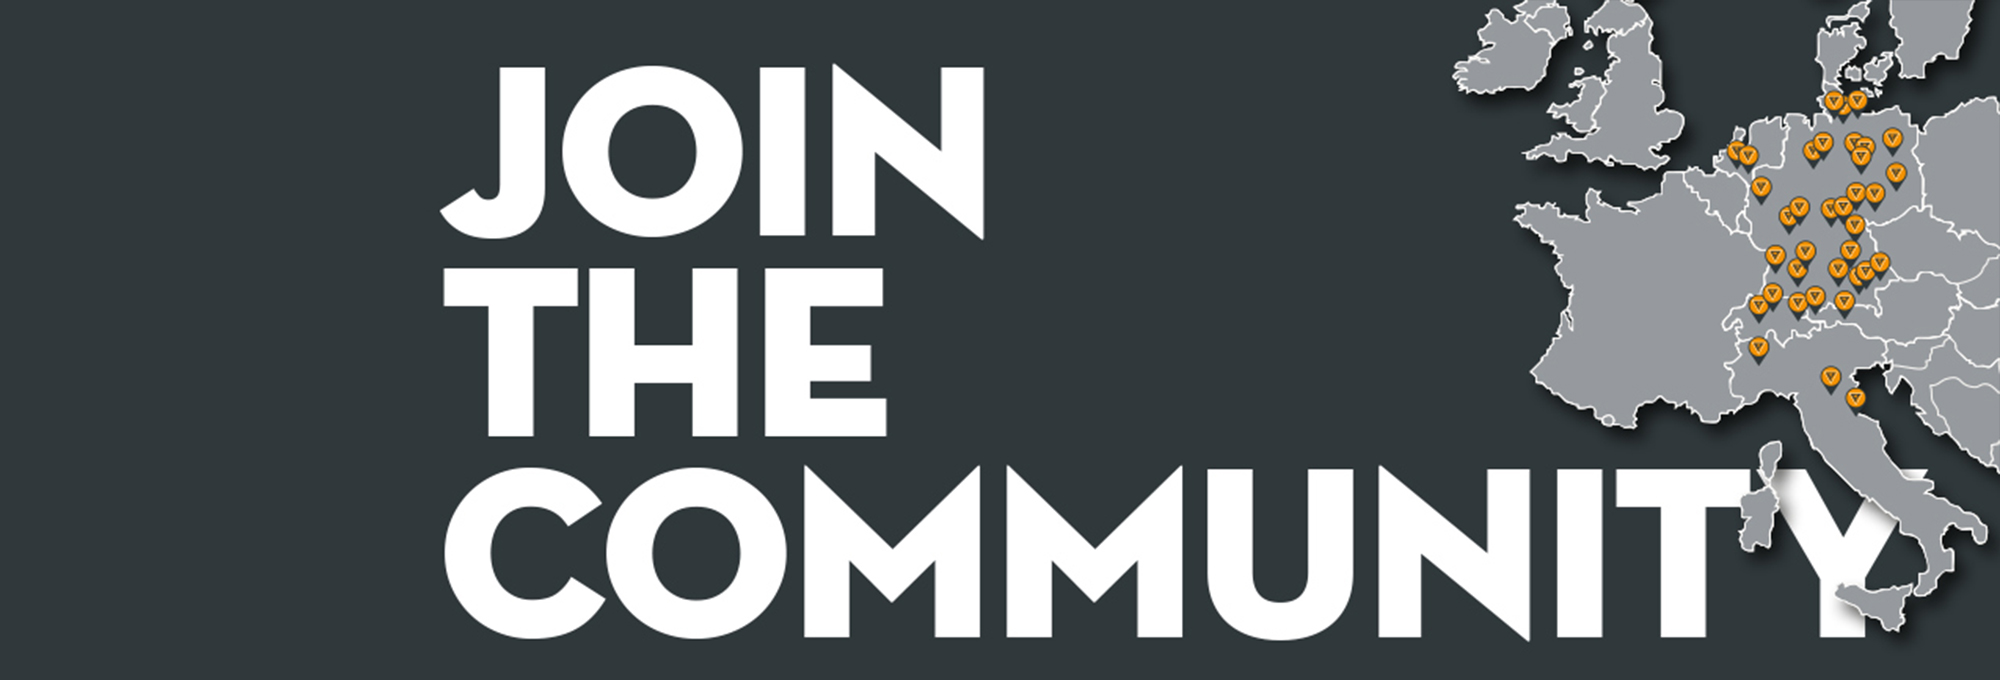 JOIN THE COMMUNITY!